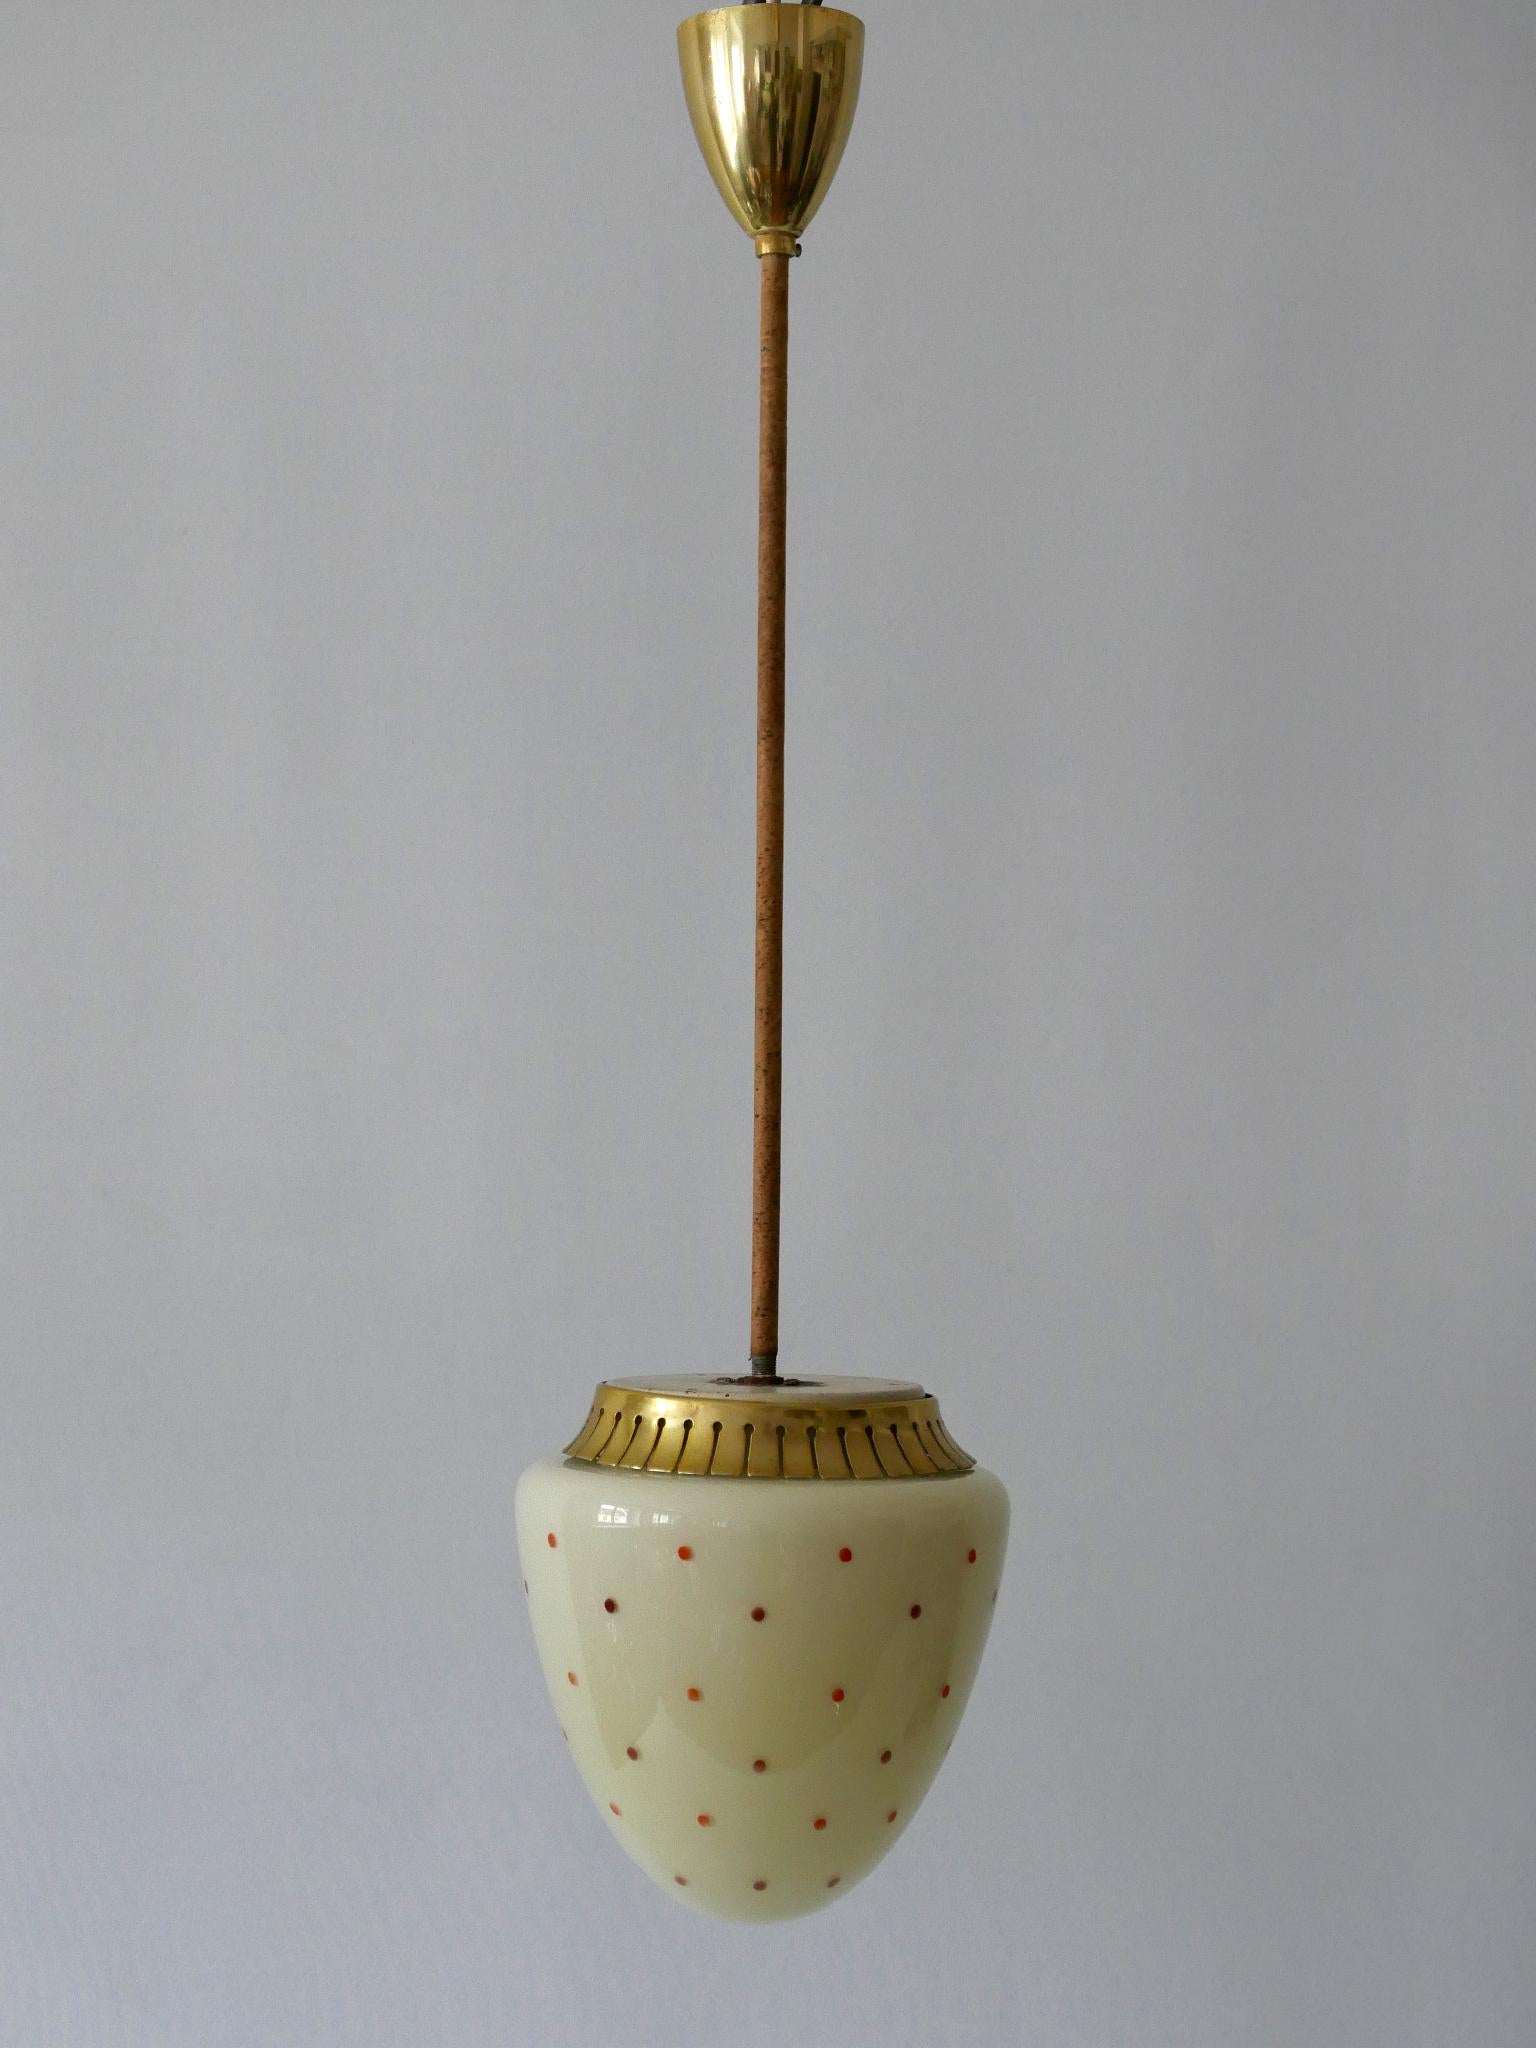 Exceptional and elegant Mid-Century Modern pendant lamp. Designed and manufactured in 1950s, Germany

Executed in crème-colored opaline glass, brass anodized aluminium, and metal, the pendant lamp needs 1 x E27 / E26 screw fit bulb, is wired, in